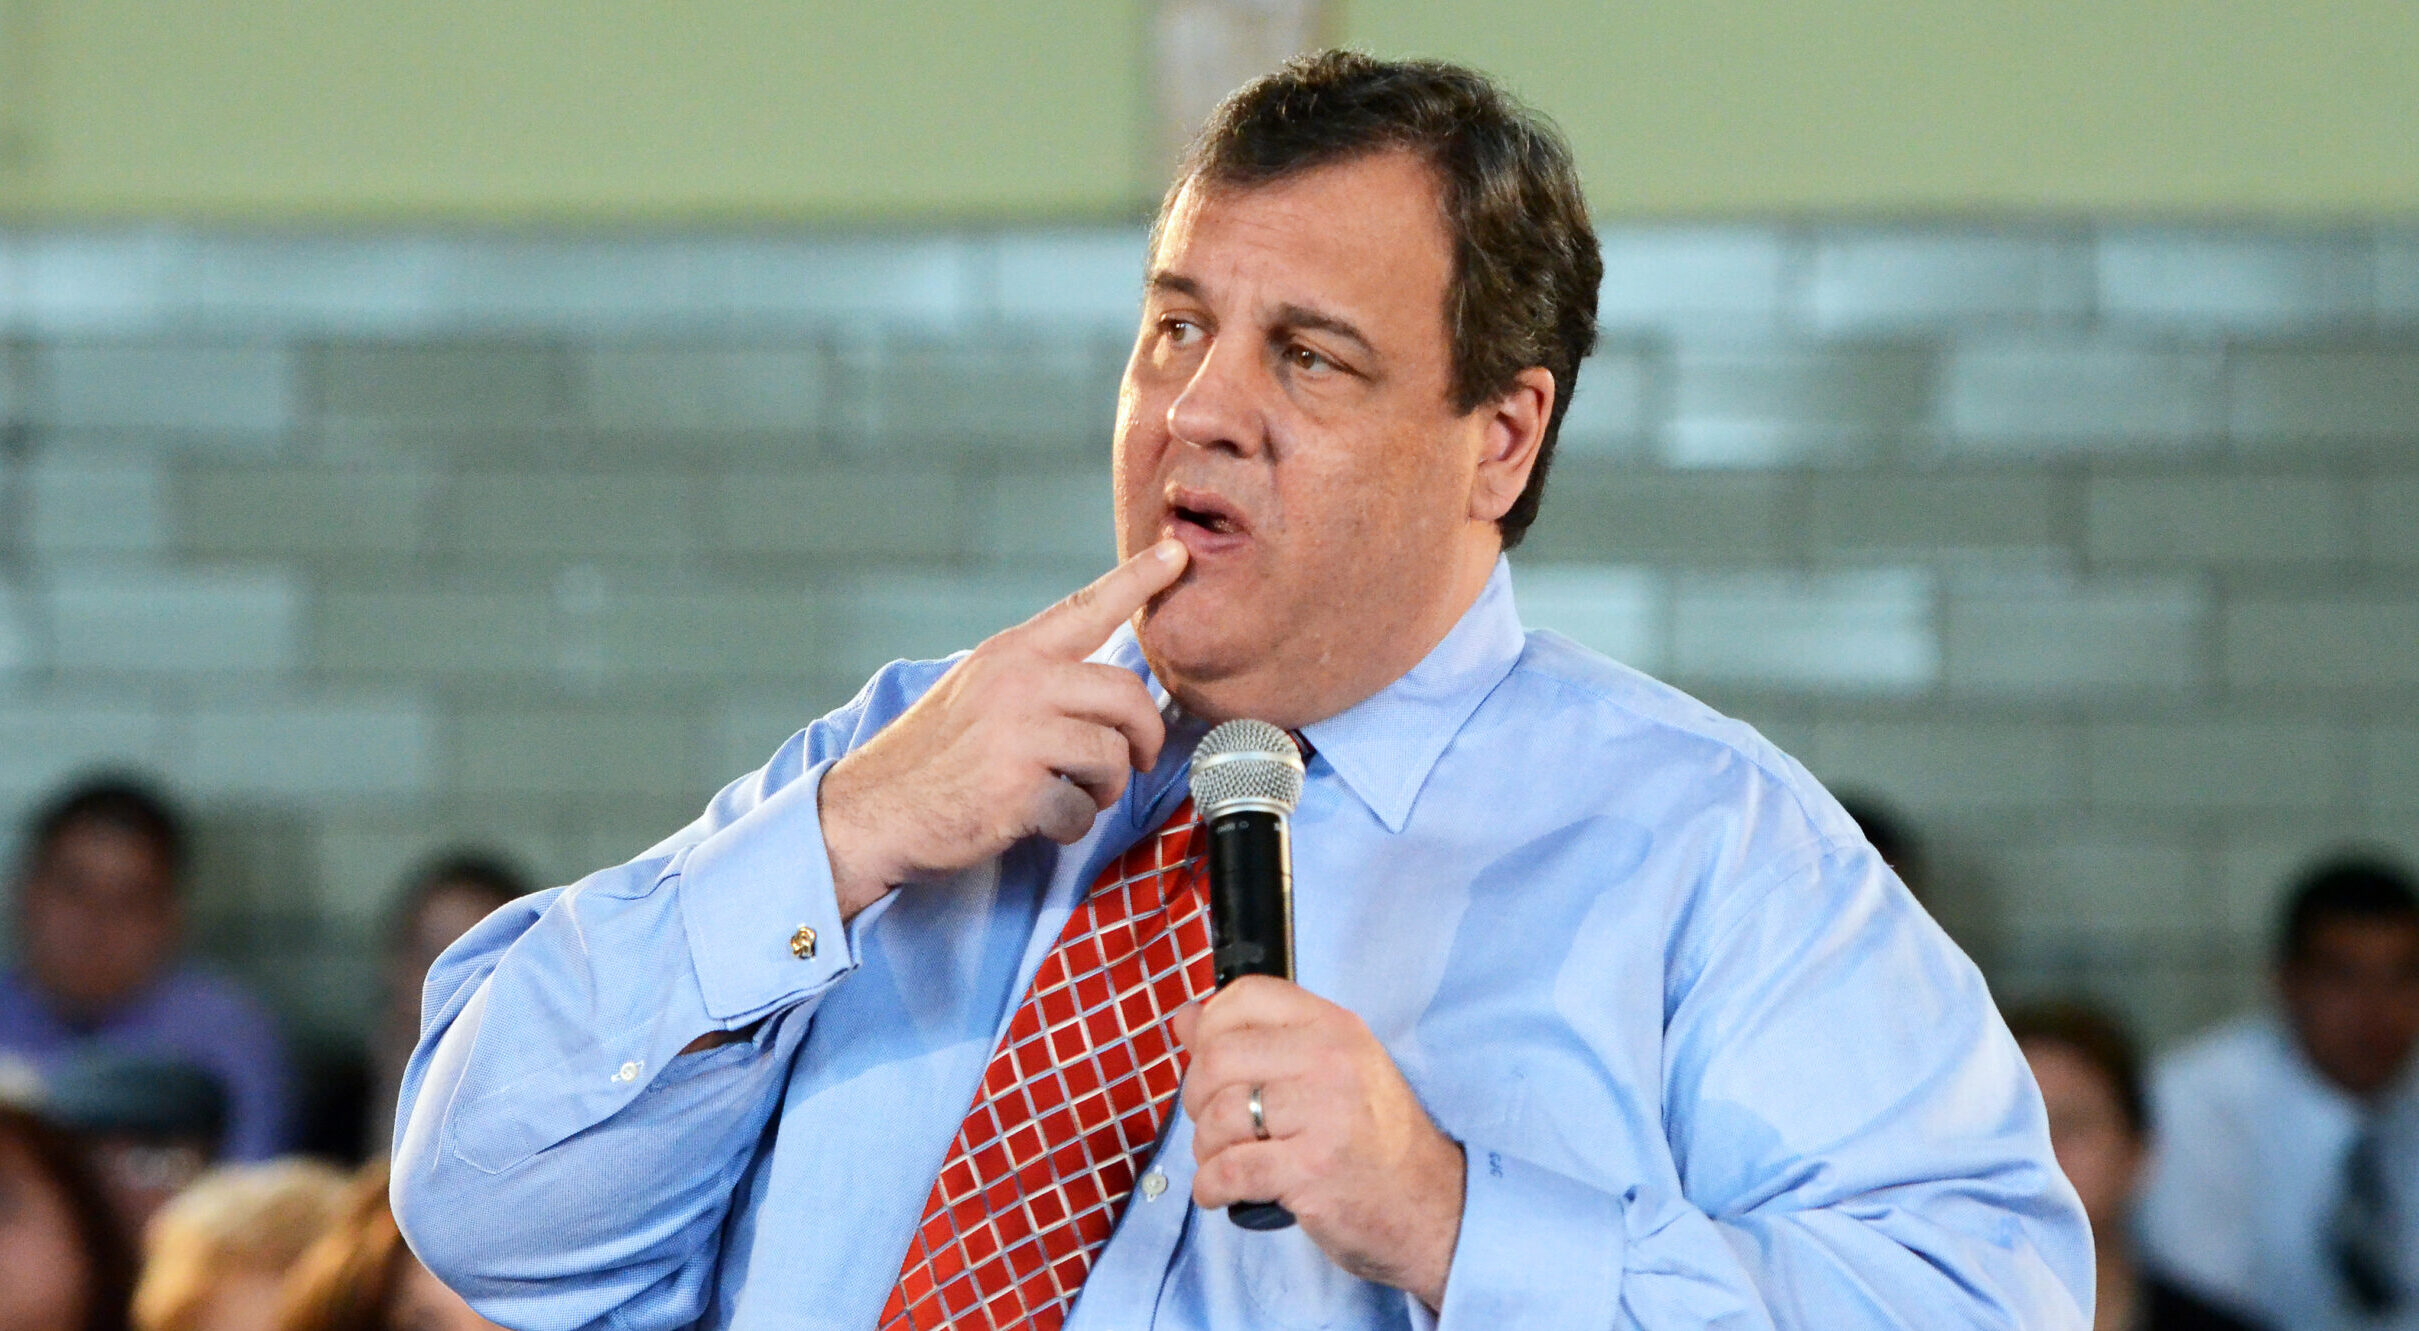 Christie Taps Out